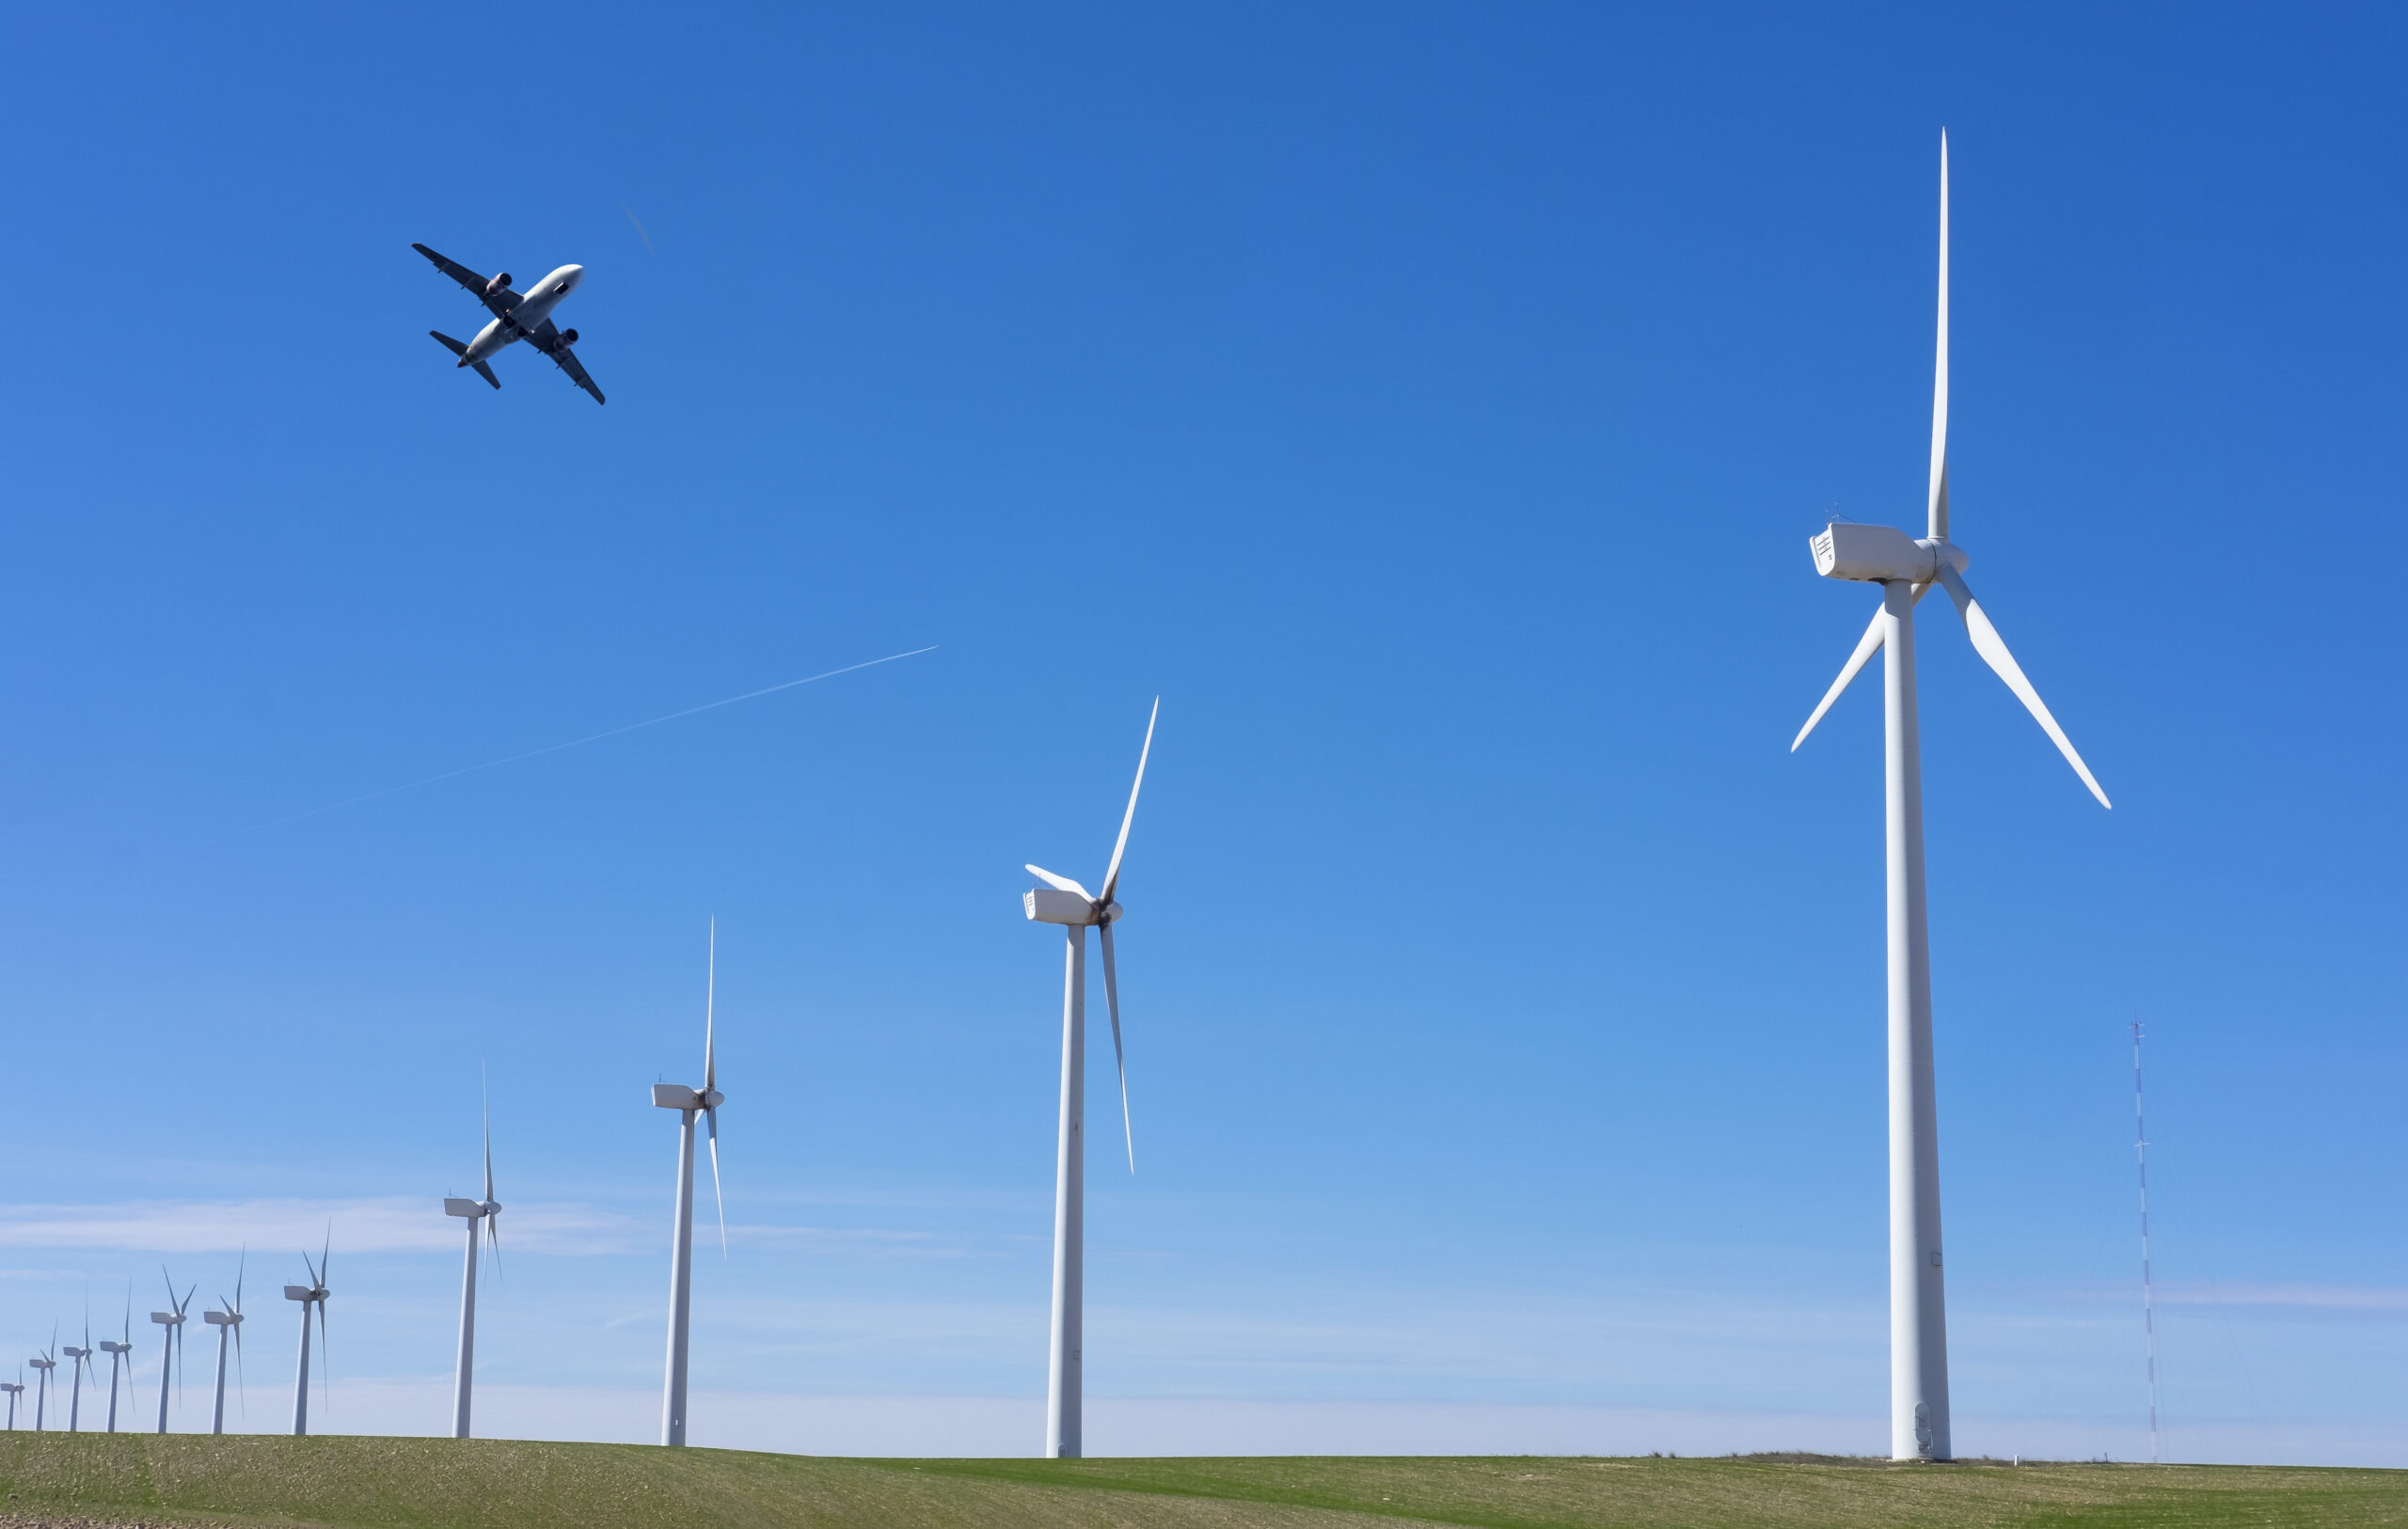 Following the government's removal of the de facto ban on the development of onshore wind energy in England we can help balance green energy initiatives with aviation safety.